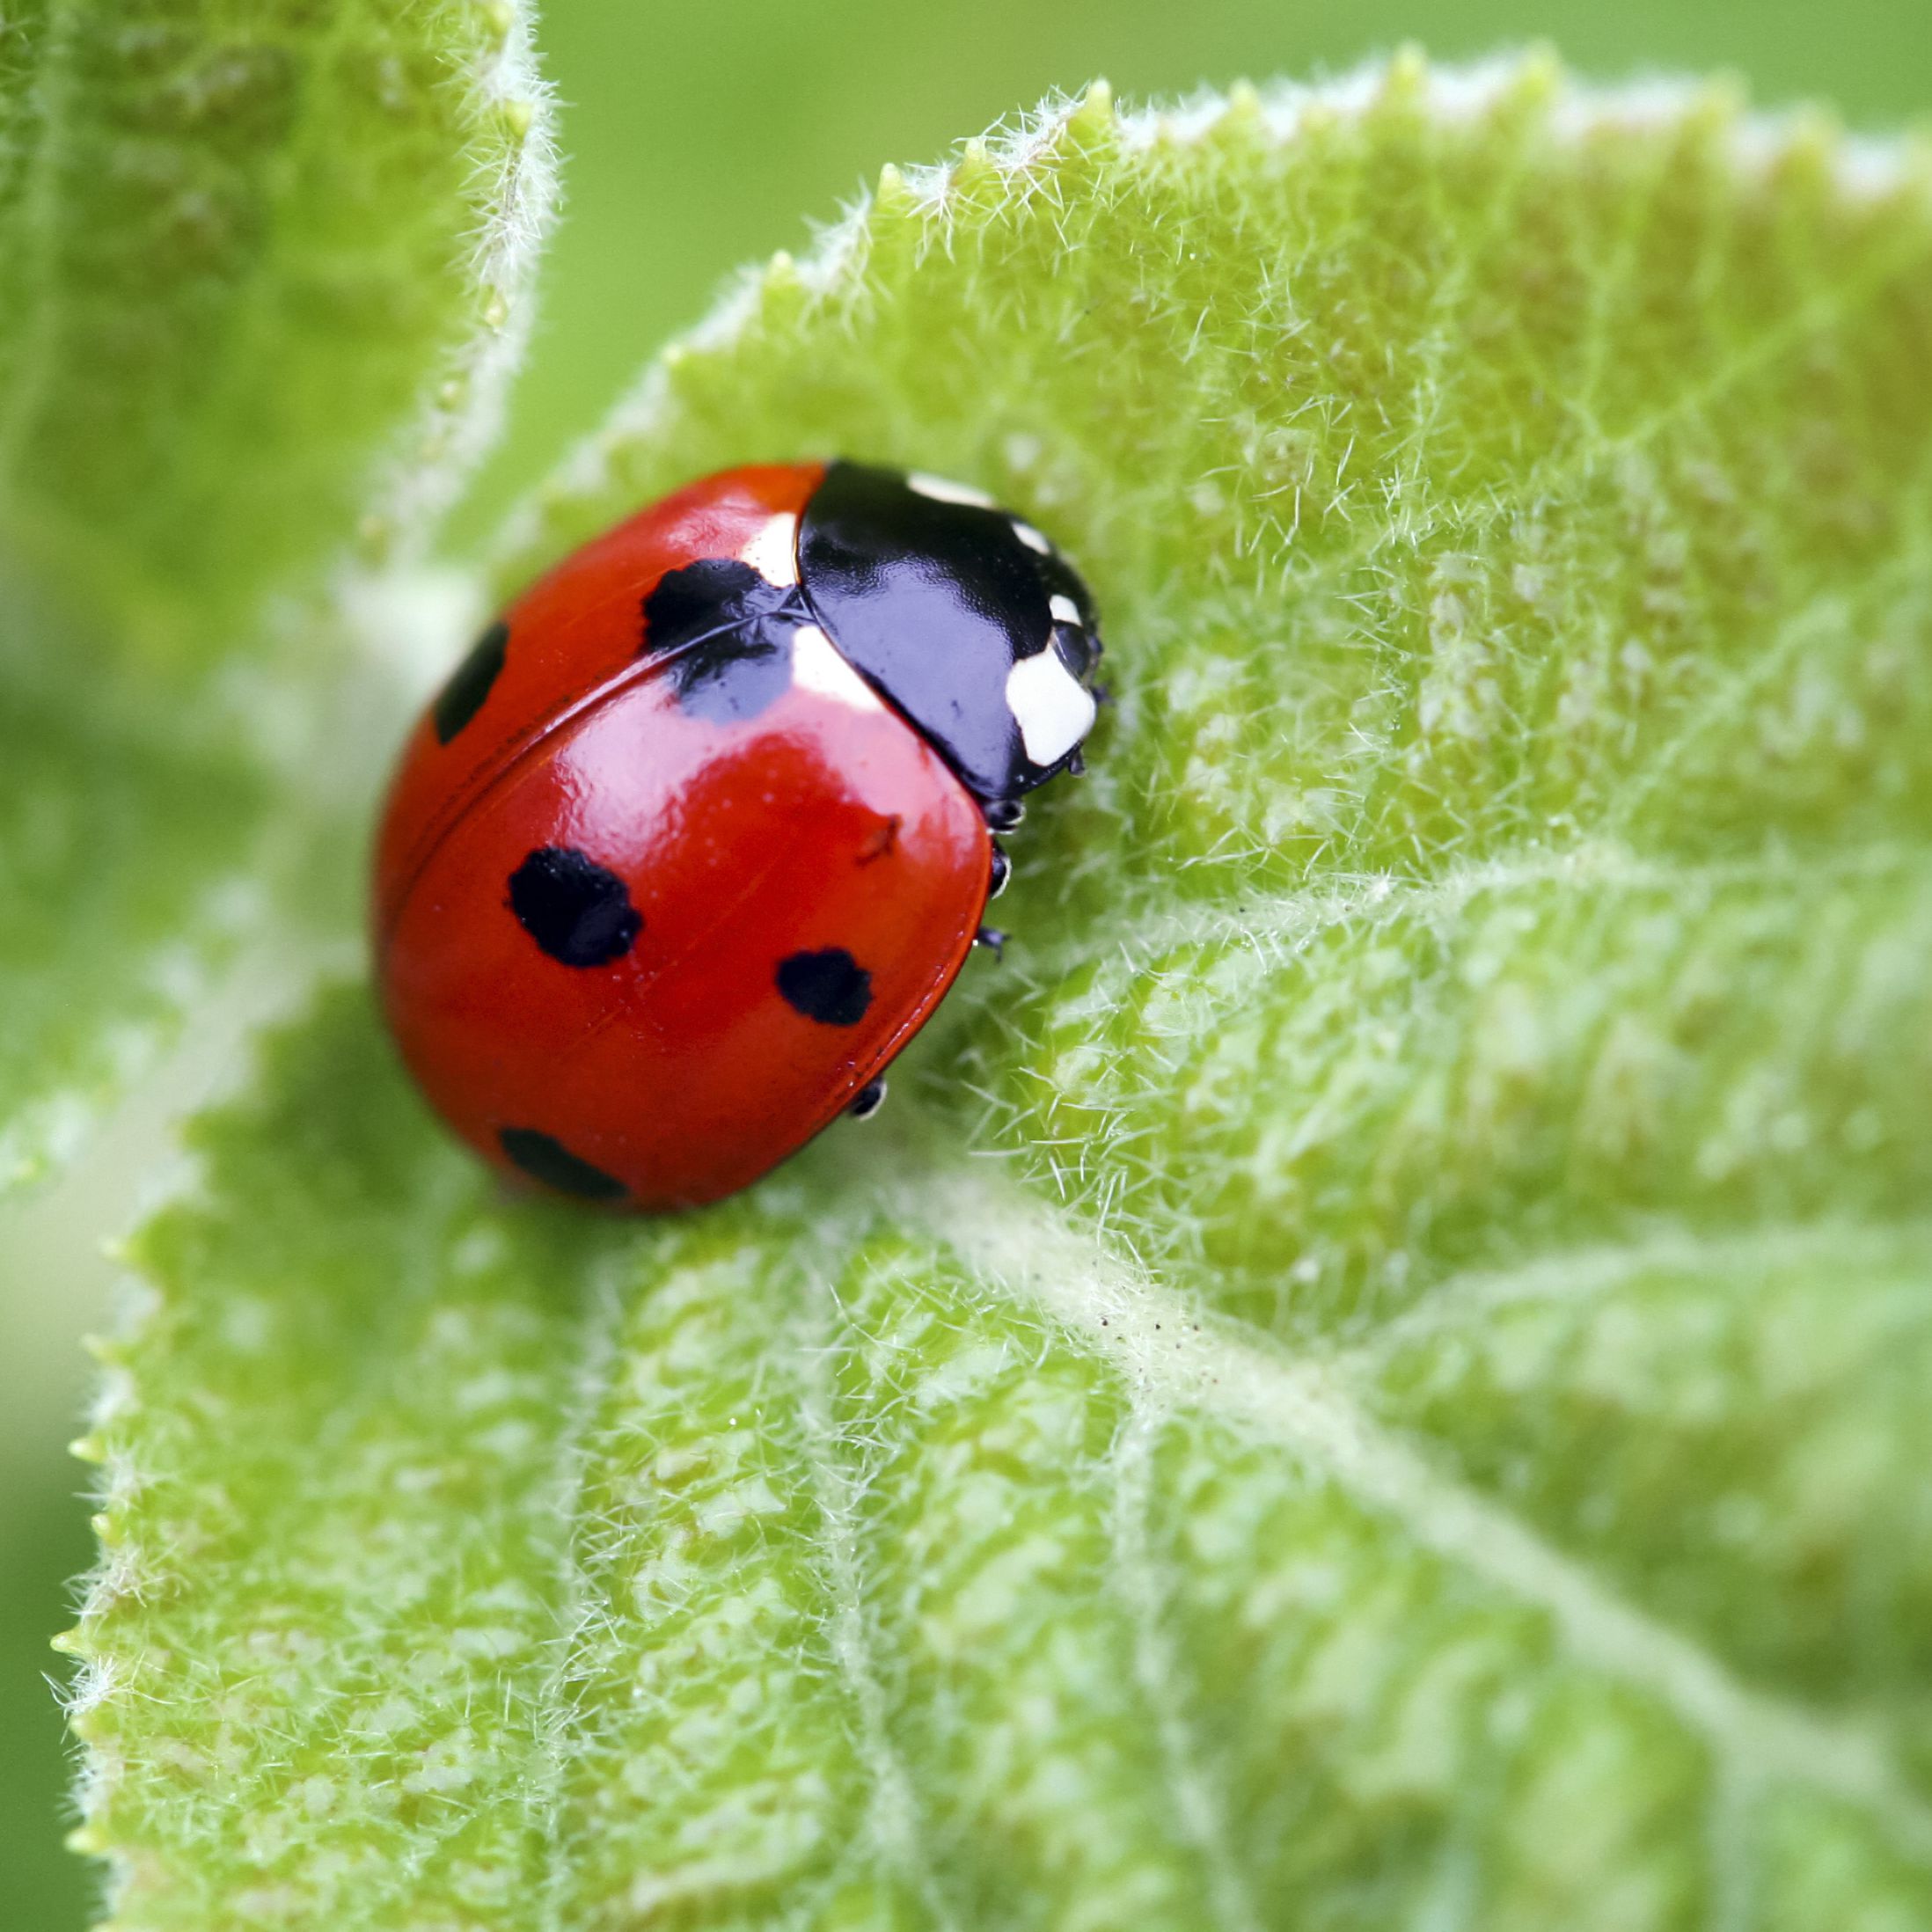 A common lady bug has spots of which color?